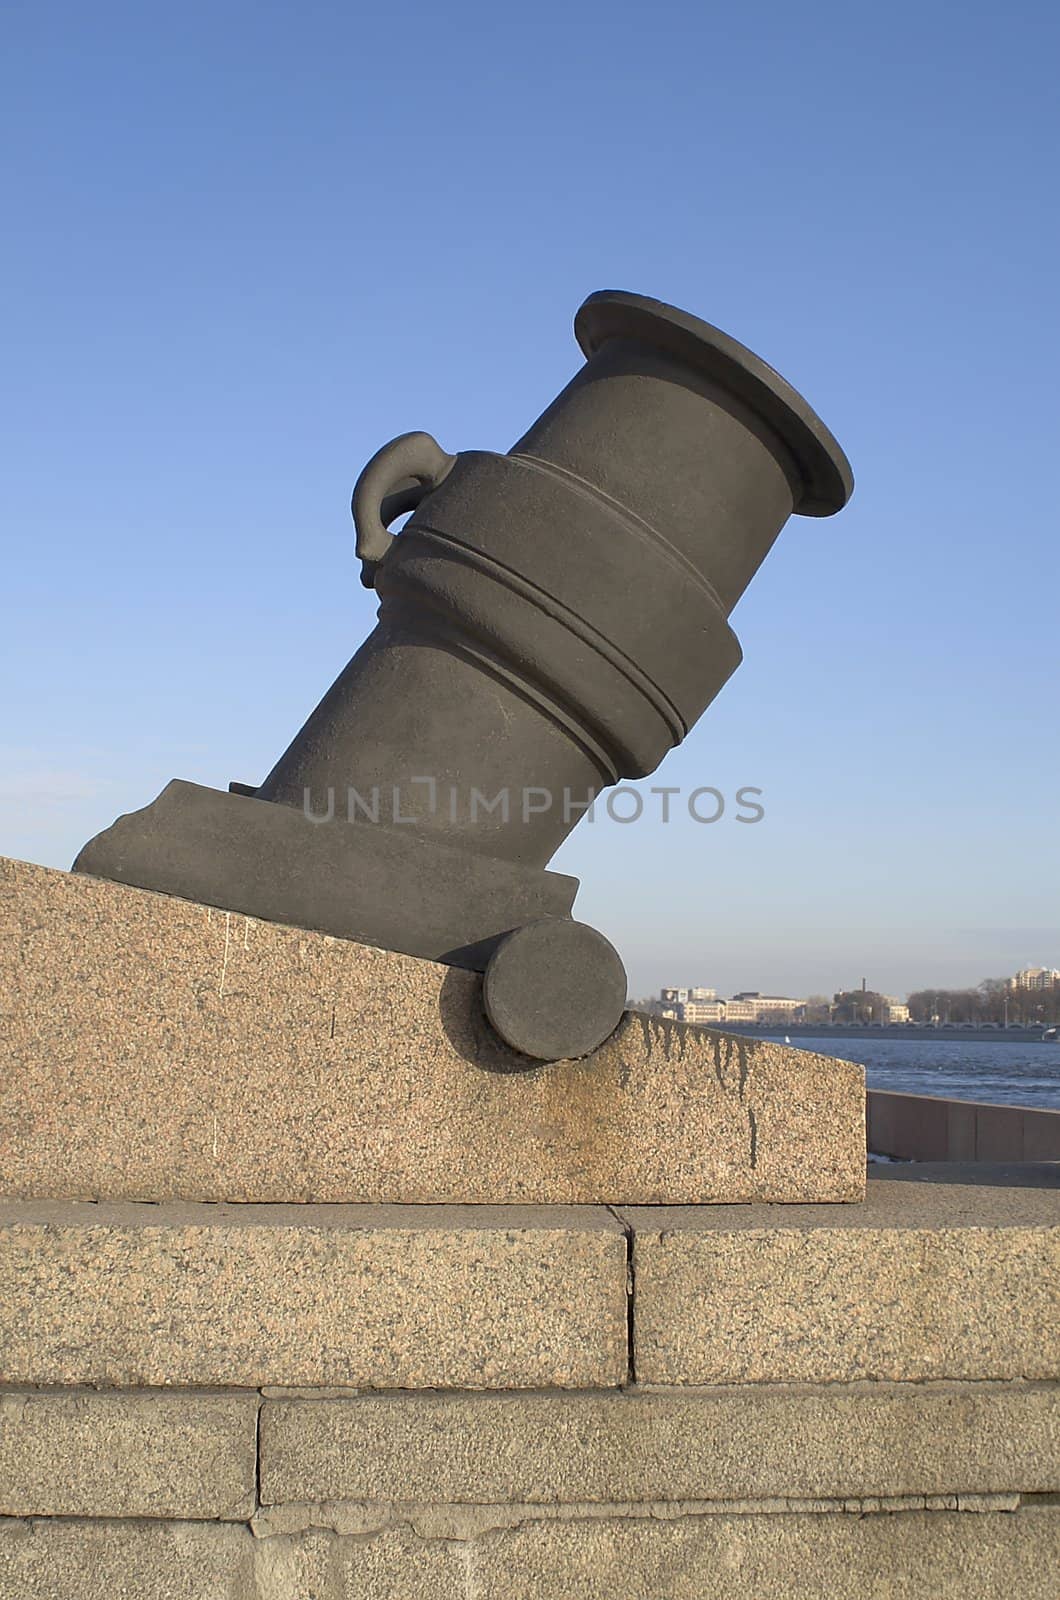 Cannon at Arsenal Embankment in Saint Petersburg, Russia.